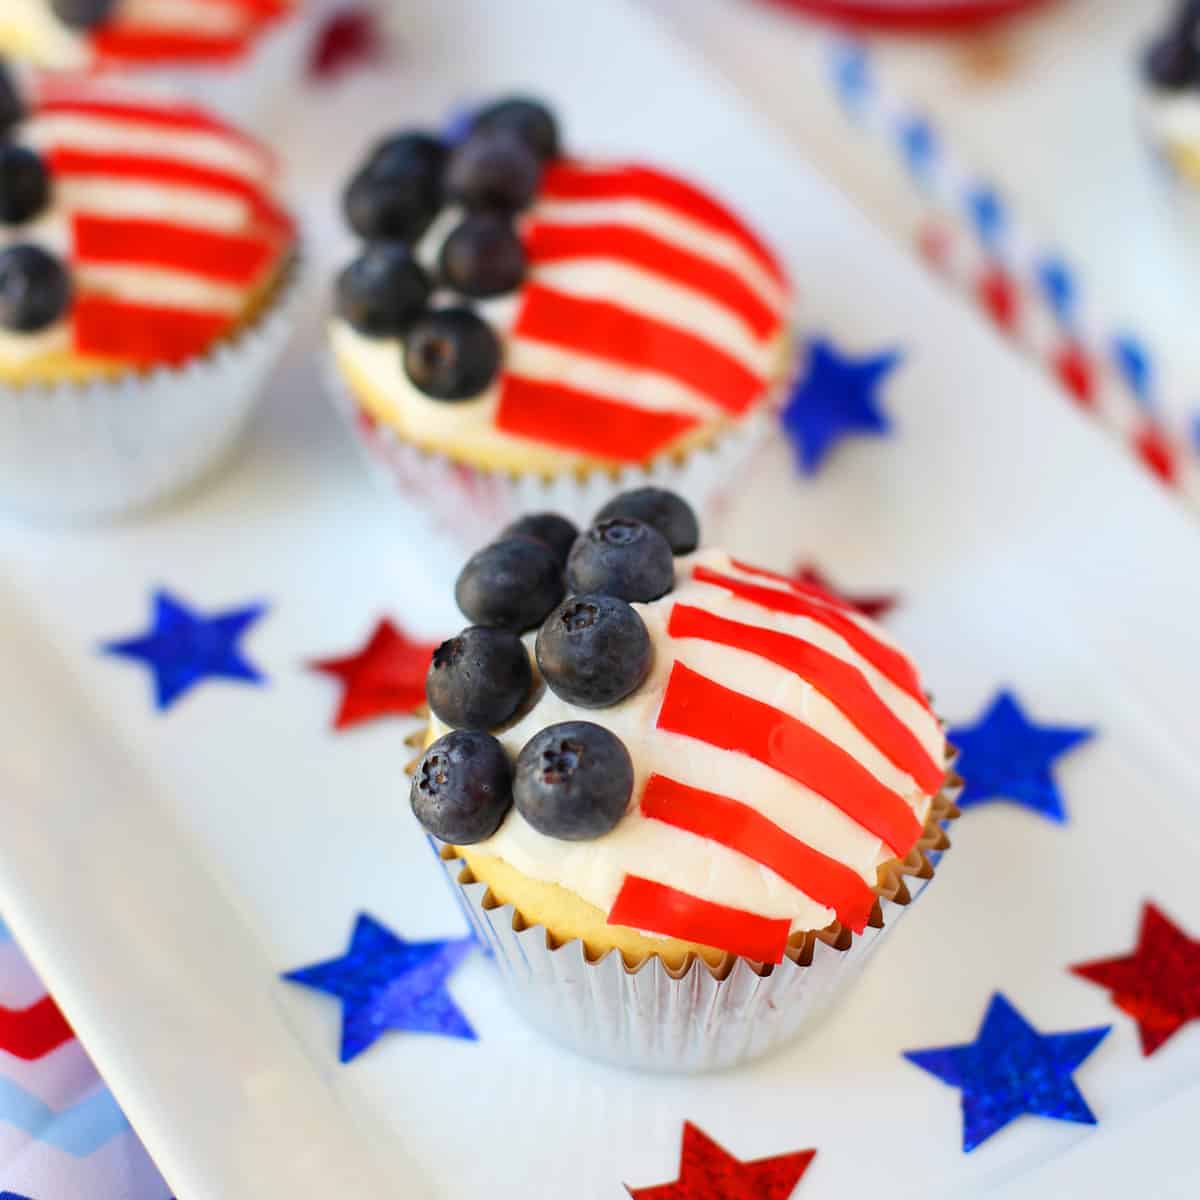 Easy flag cupcakes with blueberries for stars and red fruit rollups for stripes.